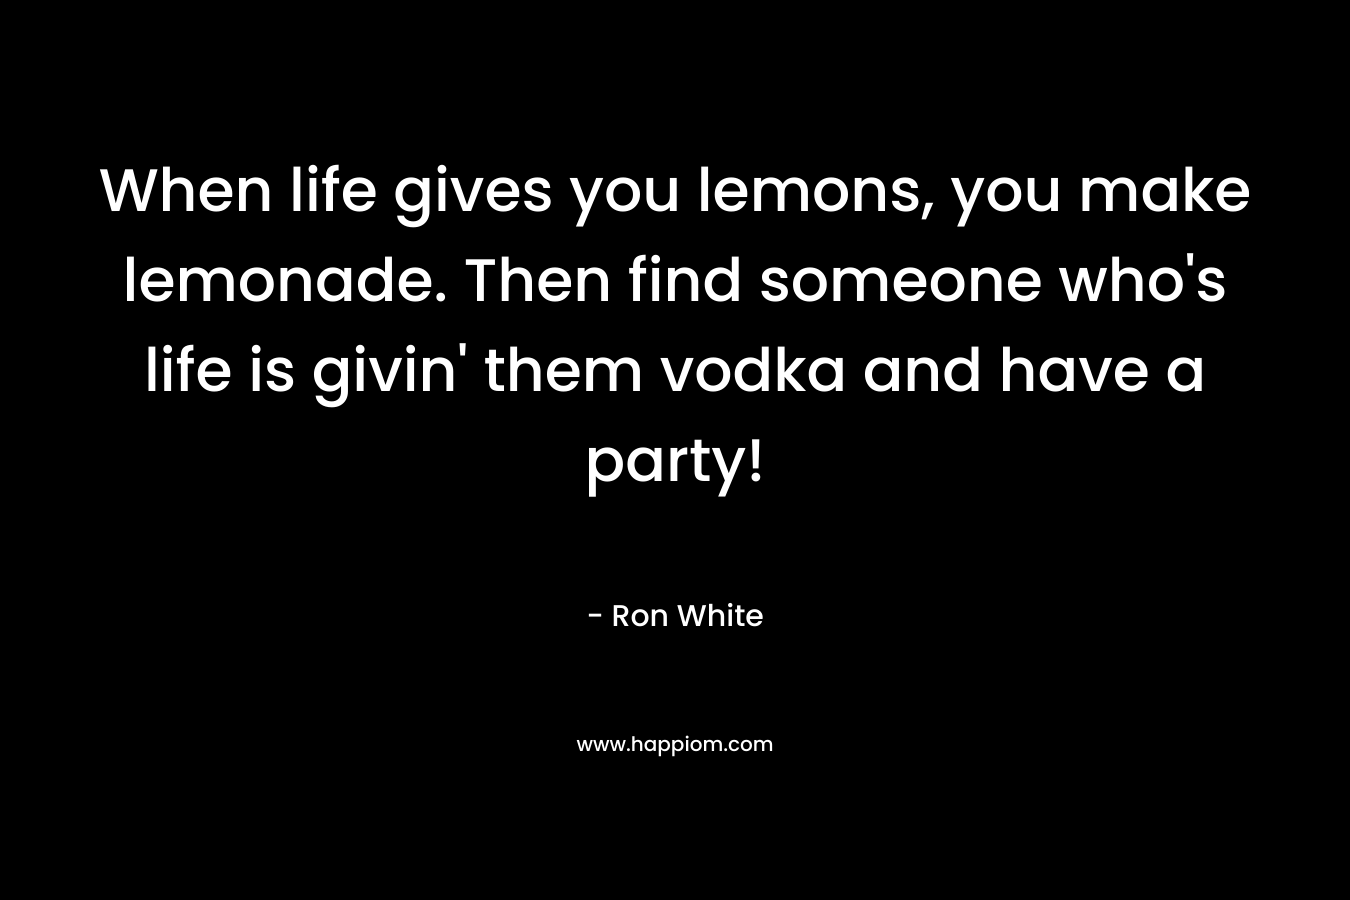 When life gives you lemons, you make lemonade. Then find someone who’s life is givin’ them vodka and have a party! – Ron White